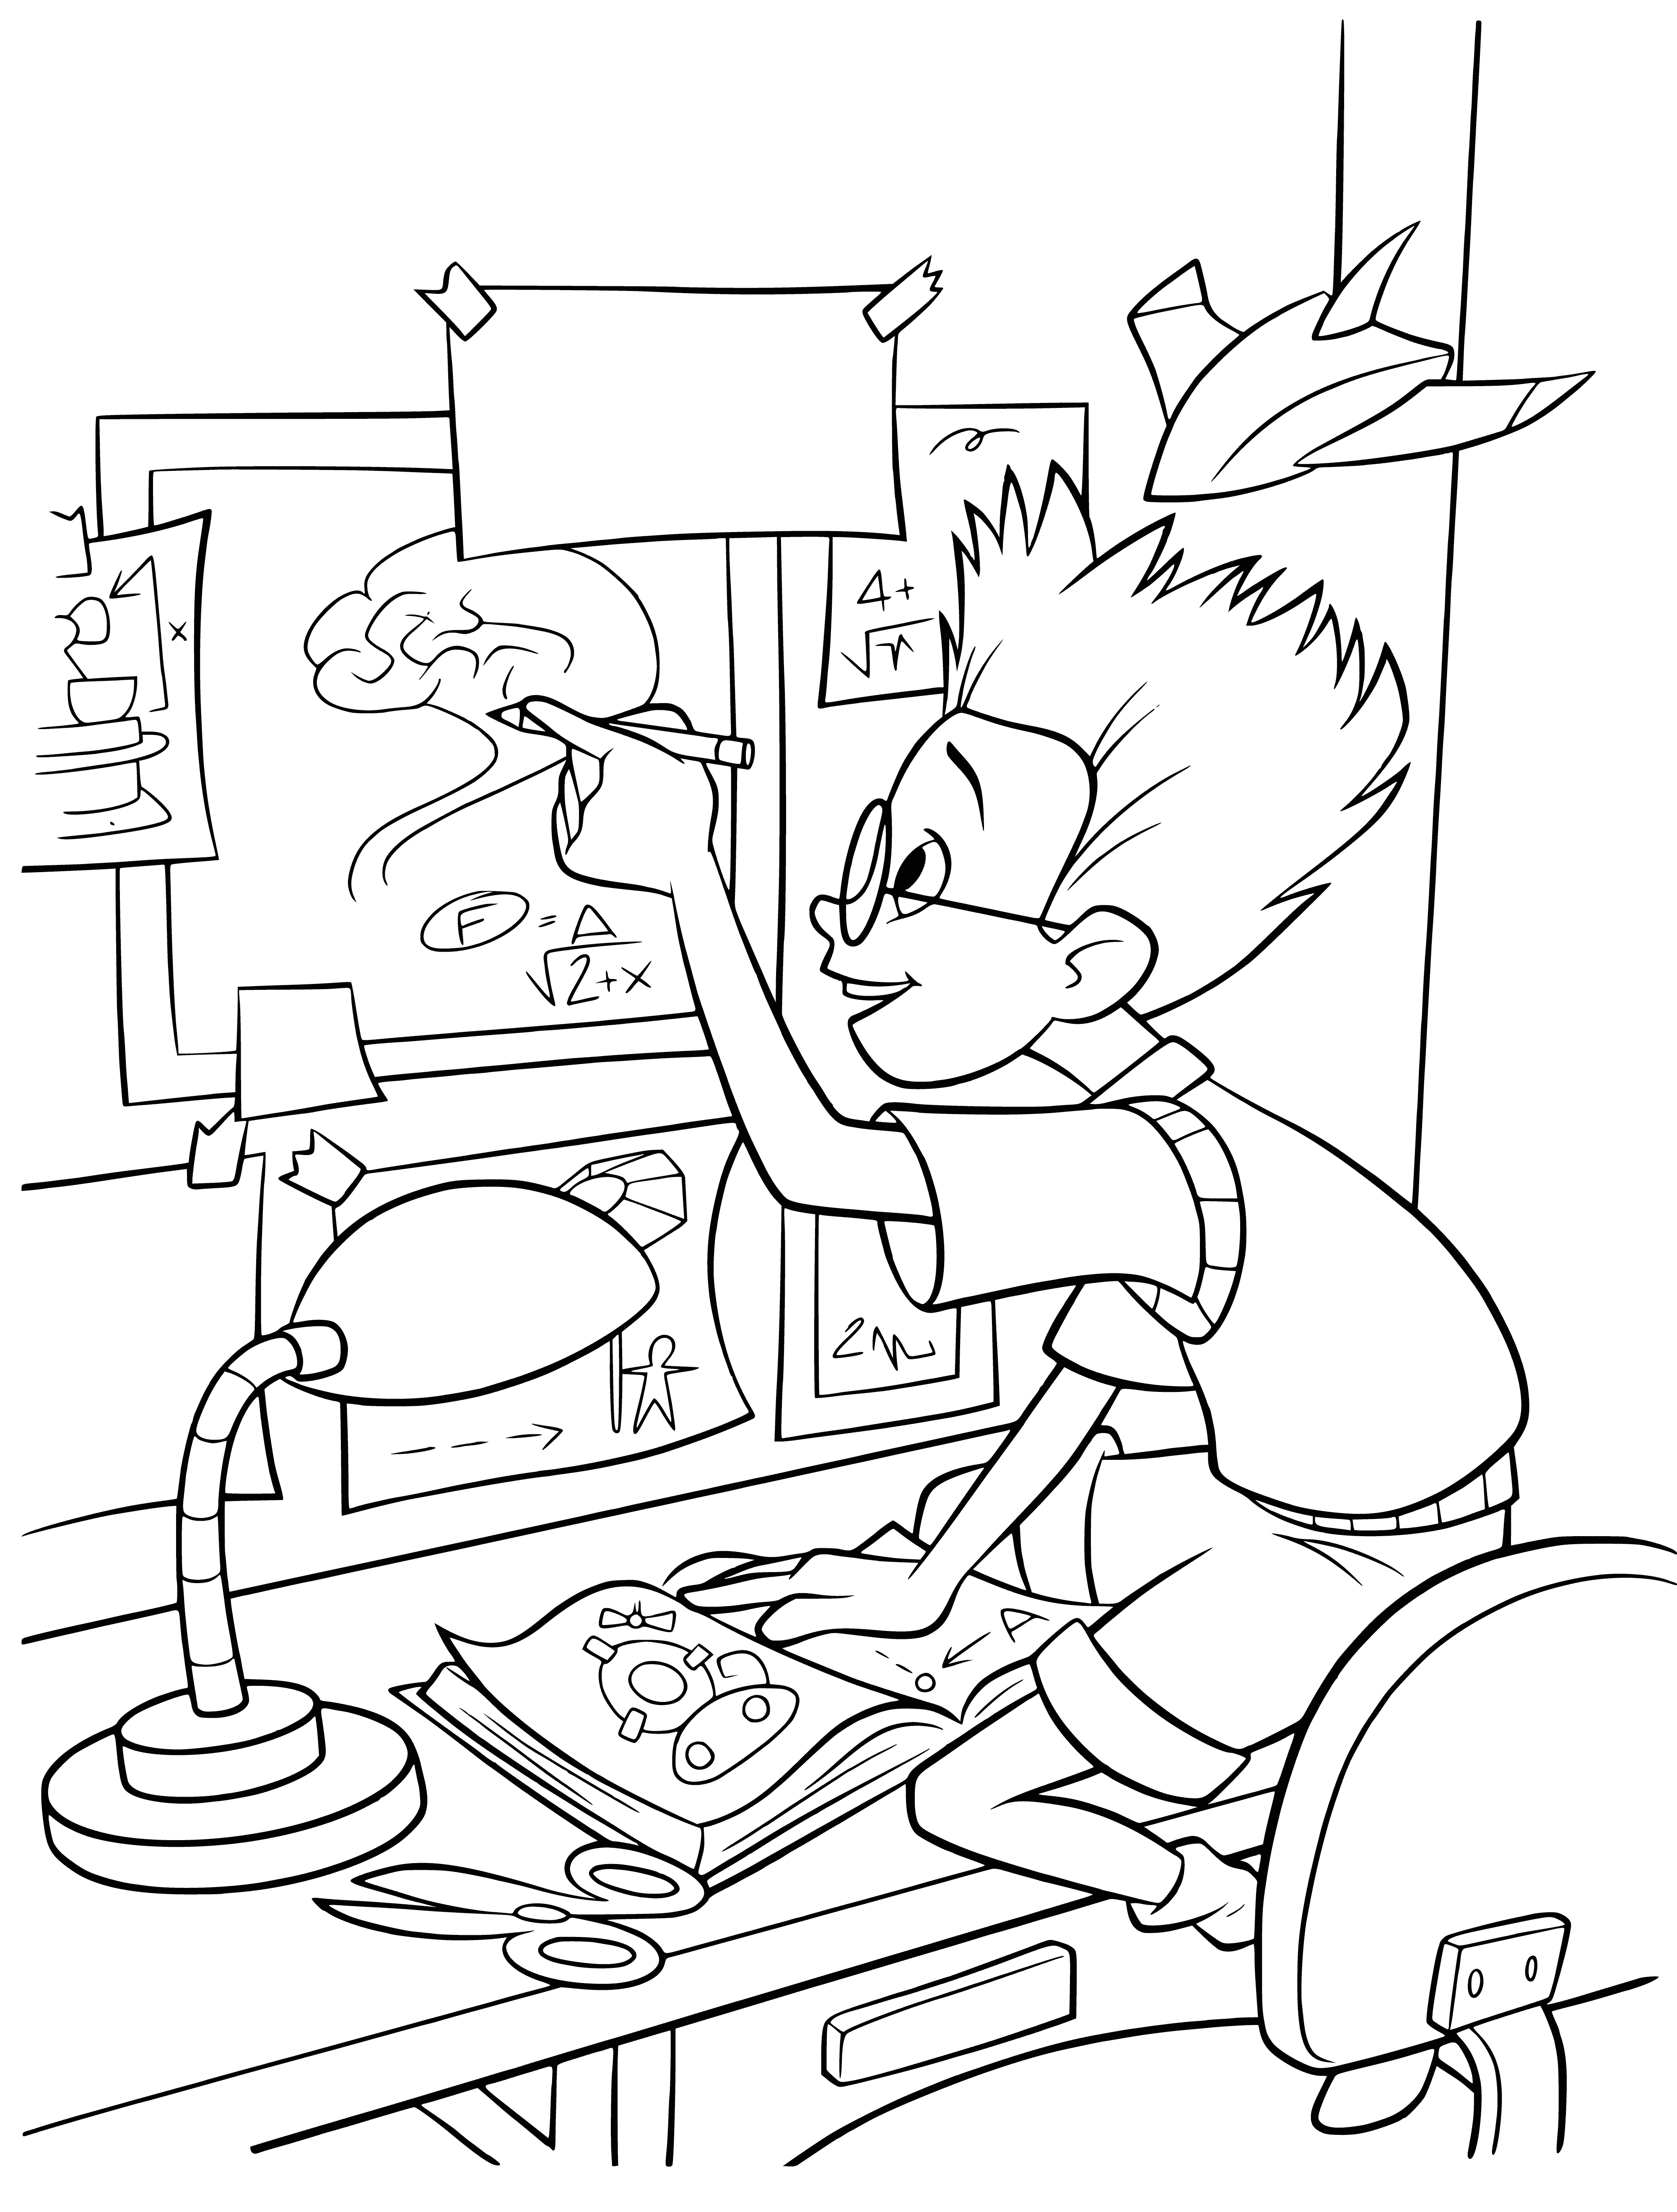 coloring page: Man w/ dark hair, brown coat & blue shirt holds tool, looks like he's inventing something.